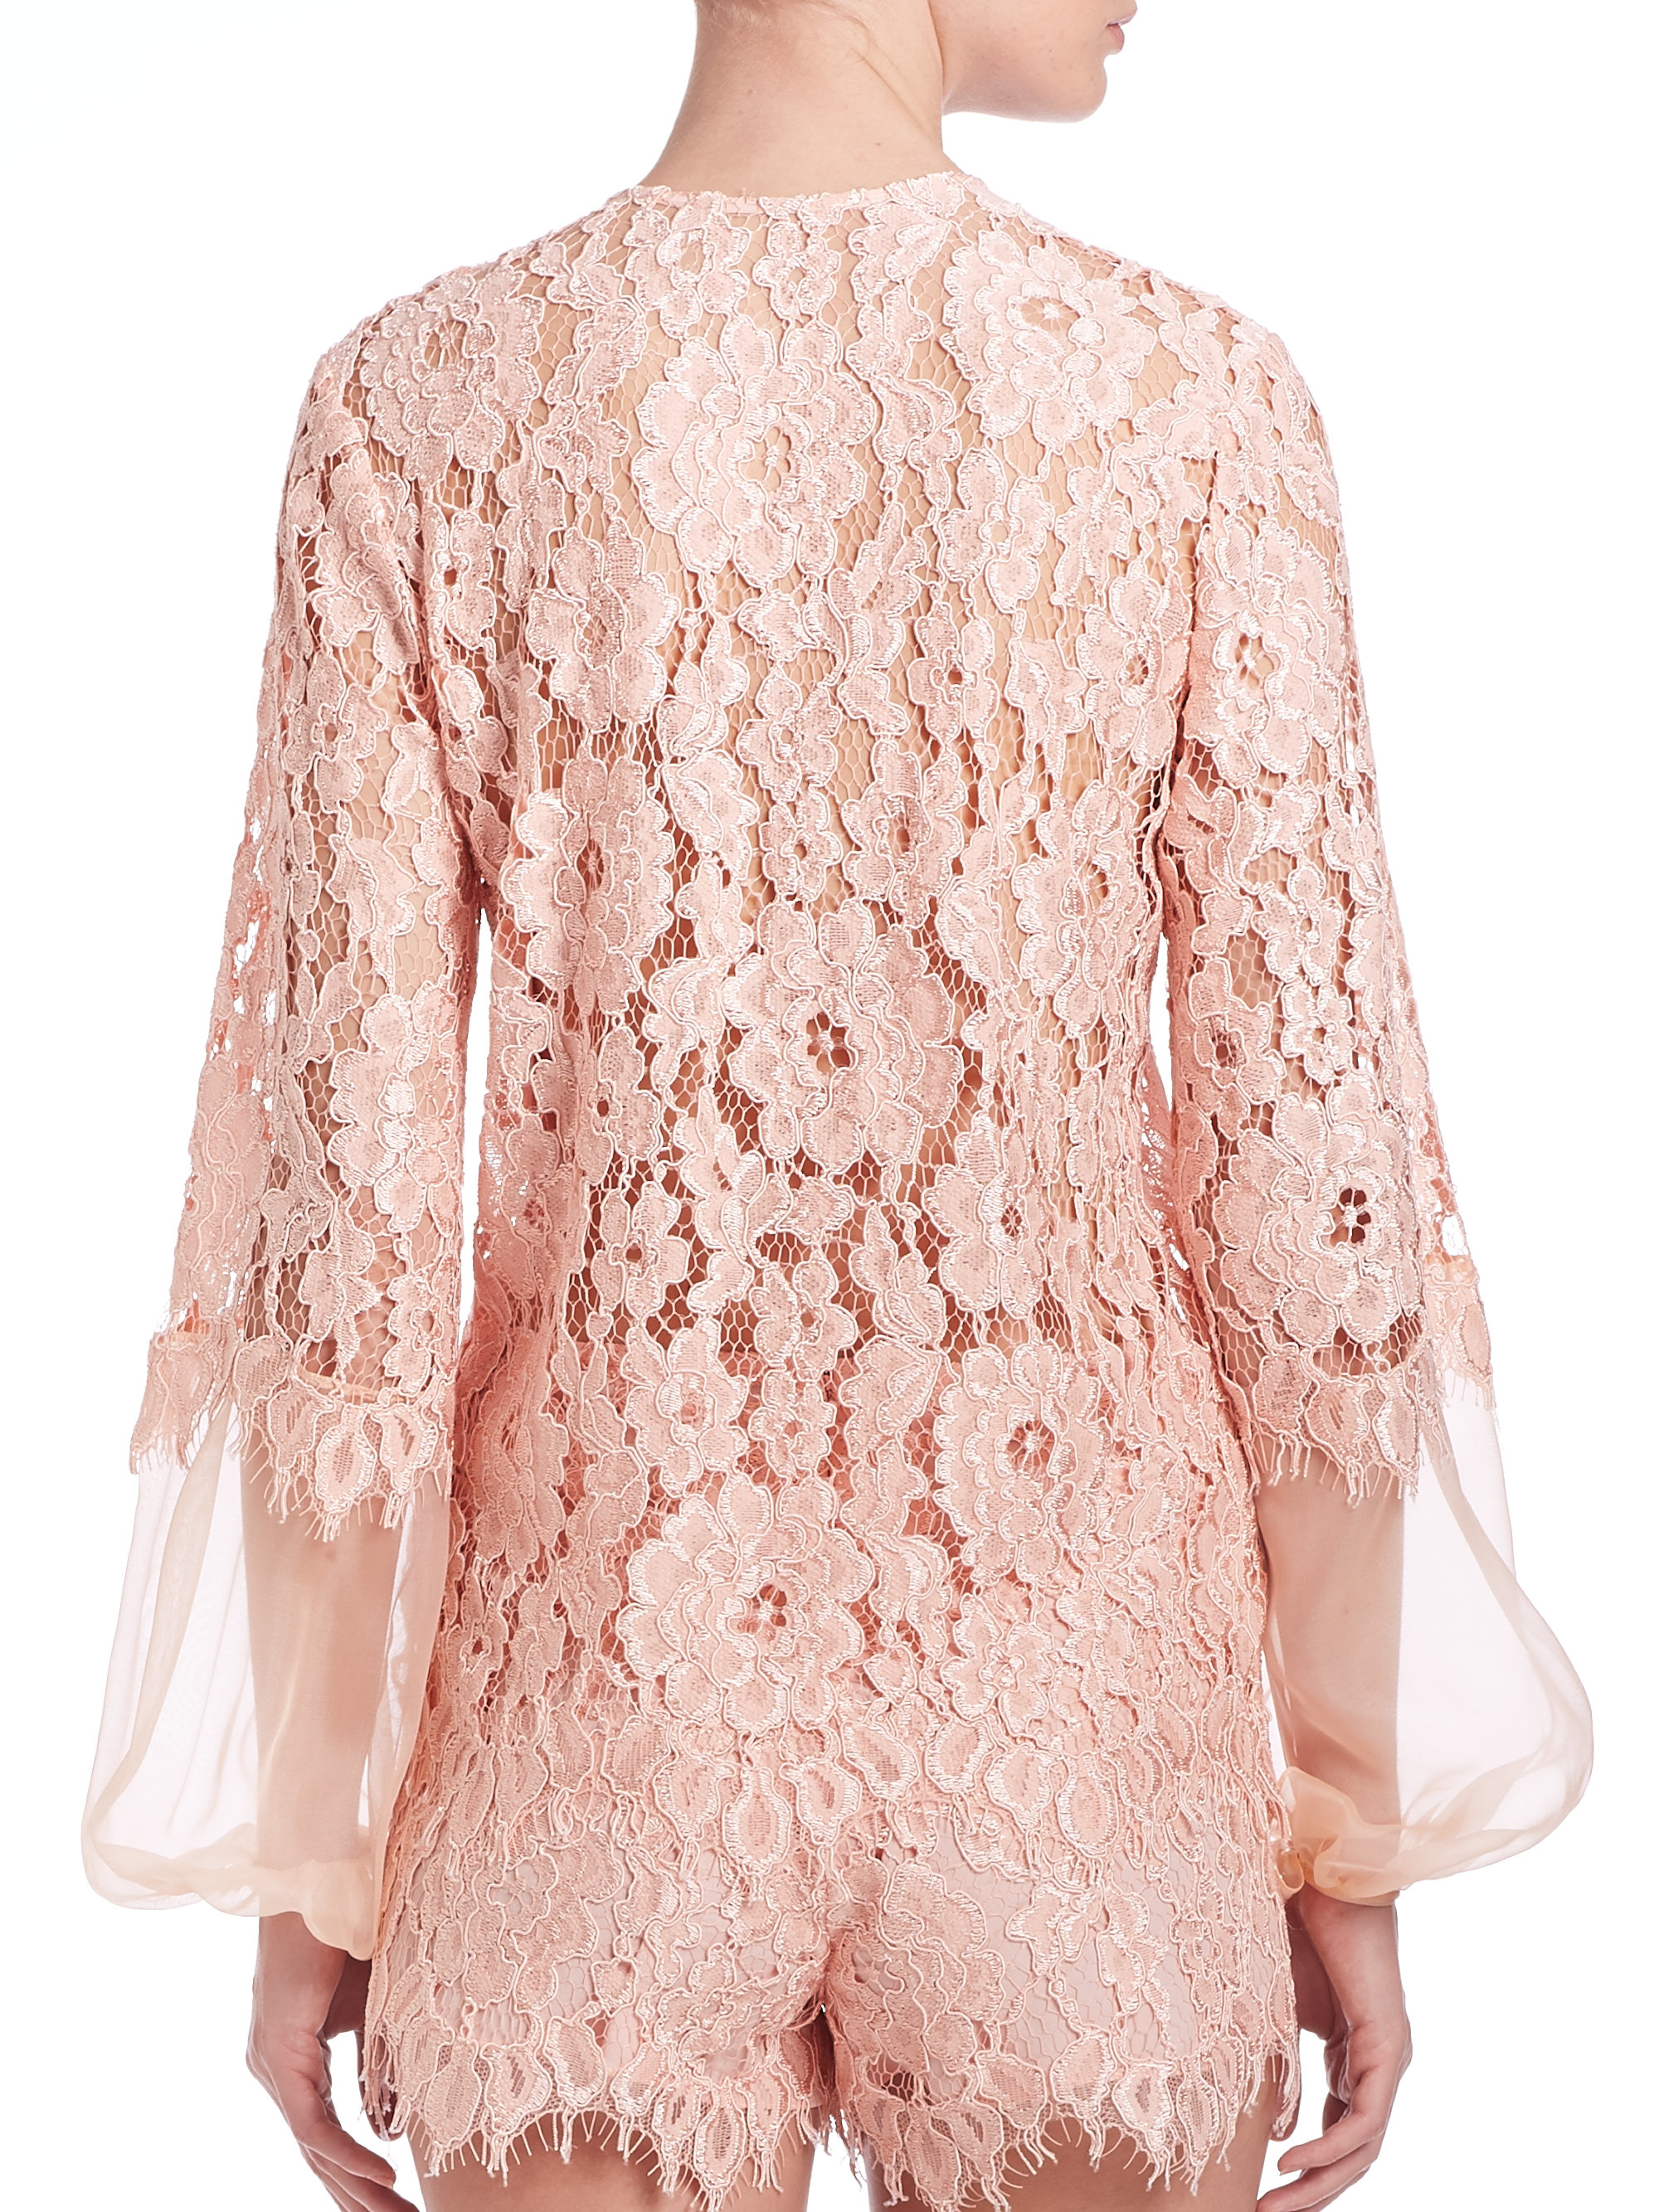 Alexis Sue Lace Blouse in Blush (Pink) - Lyst